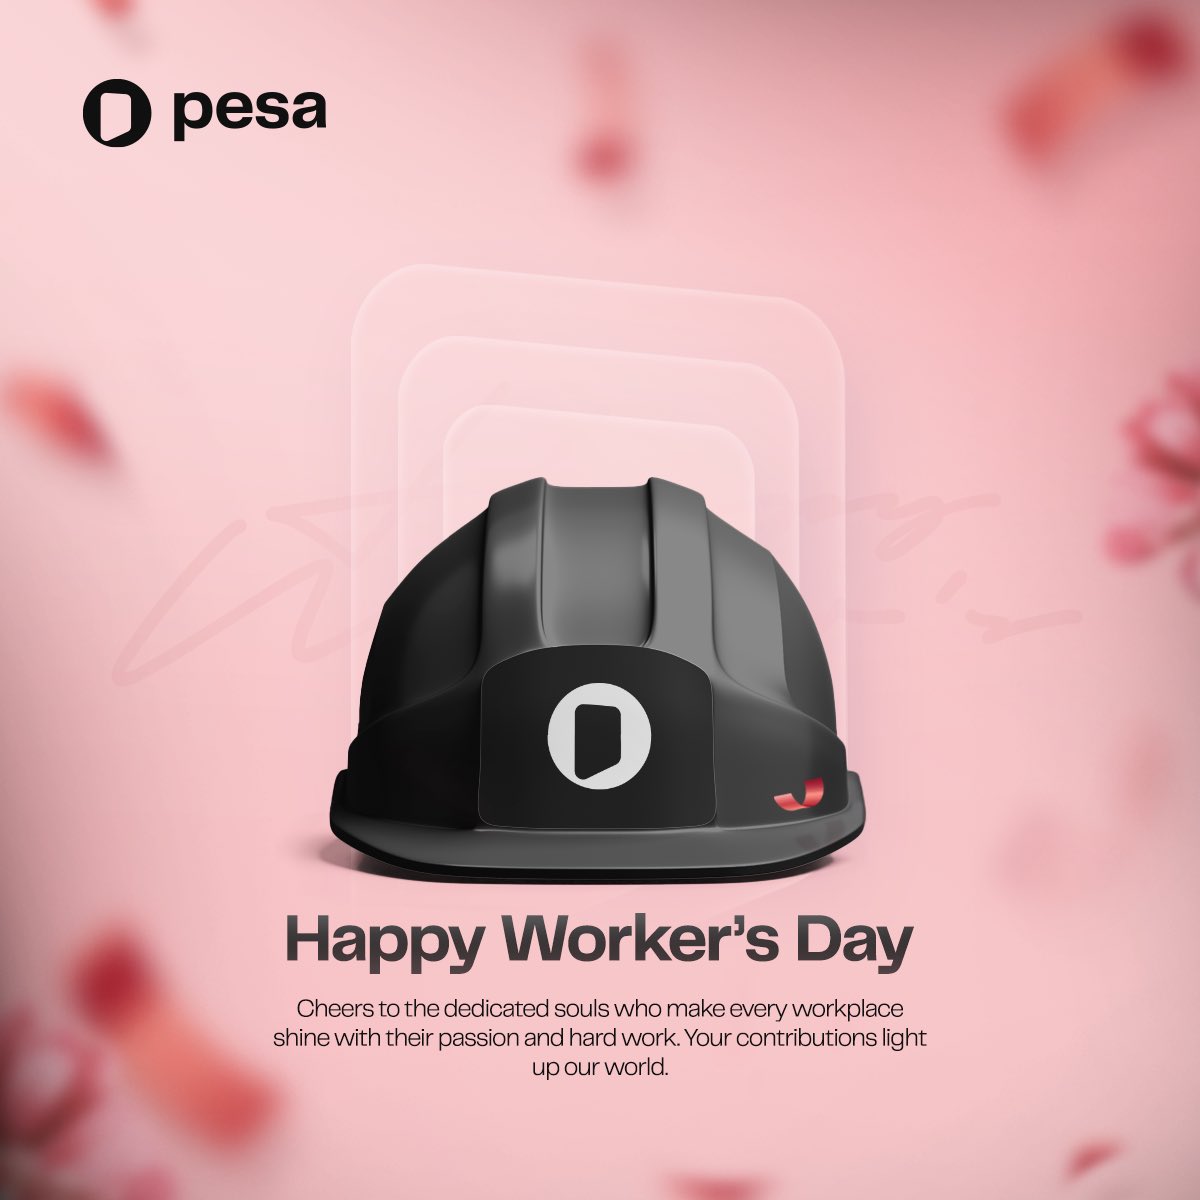 Celebrating the global workforce this #InternationalWorkersDay! 

Pesa is proud to support those who work tirelessly to build a better future, no matter where they are in the world.